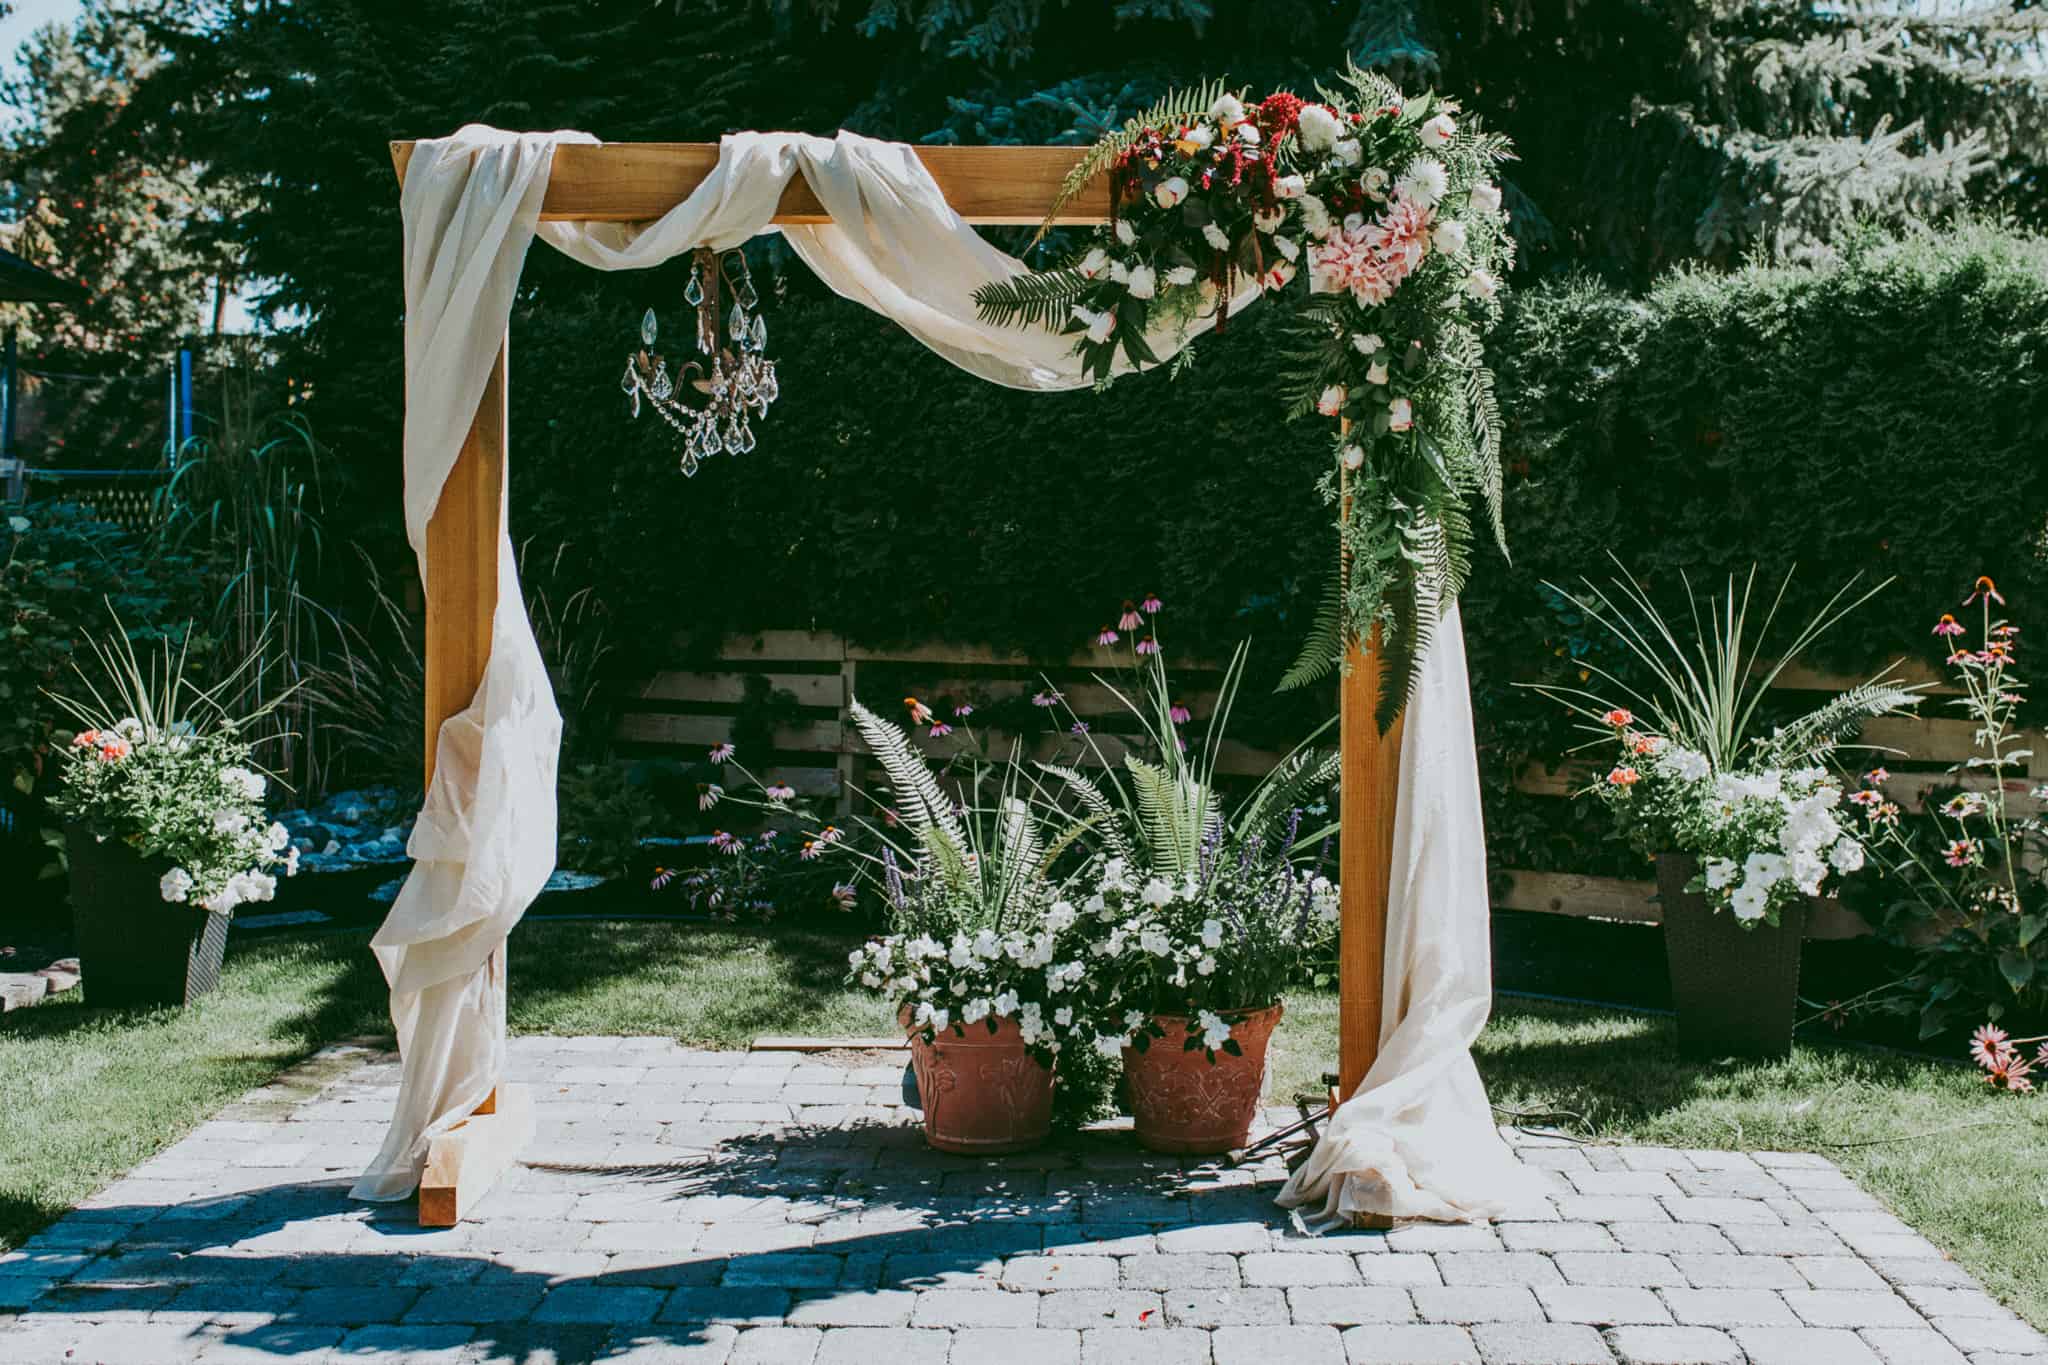 With Fabric and flowers wedding arch diy 1